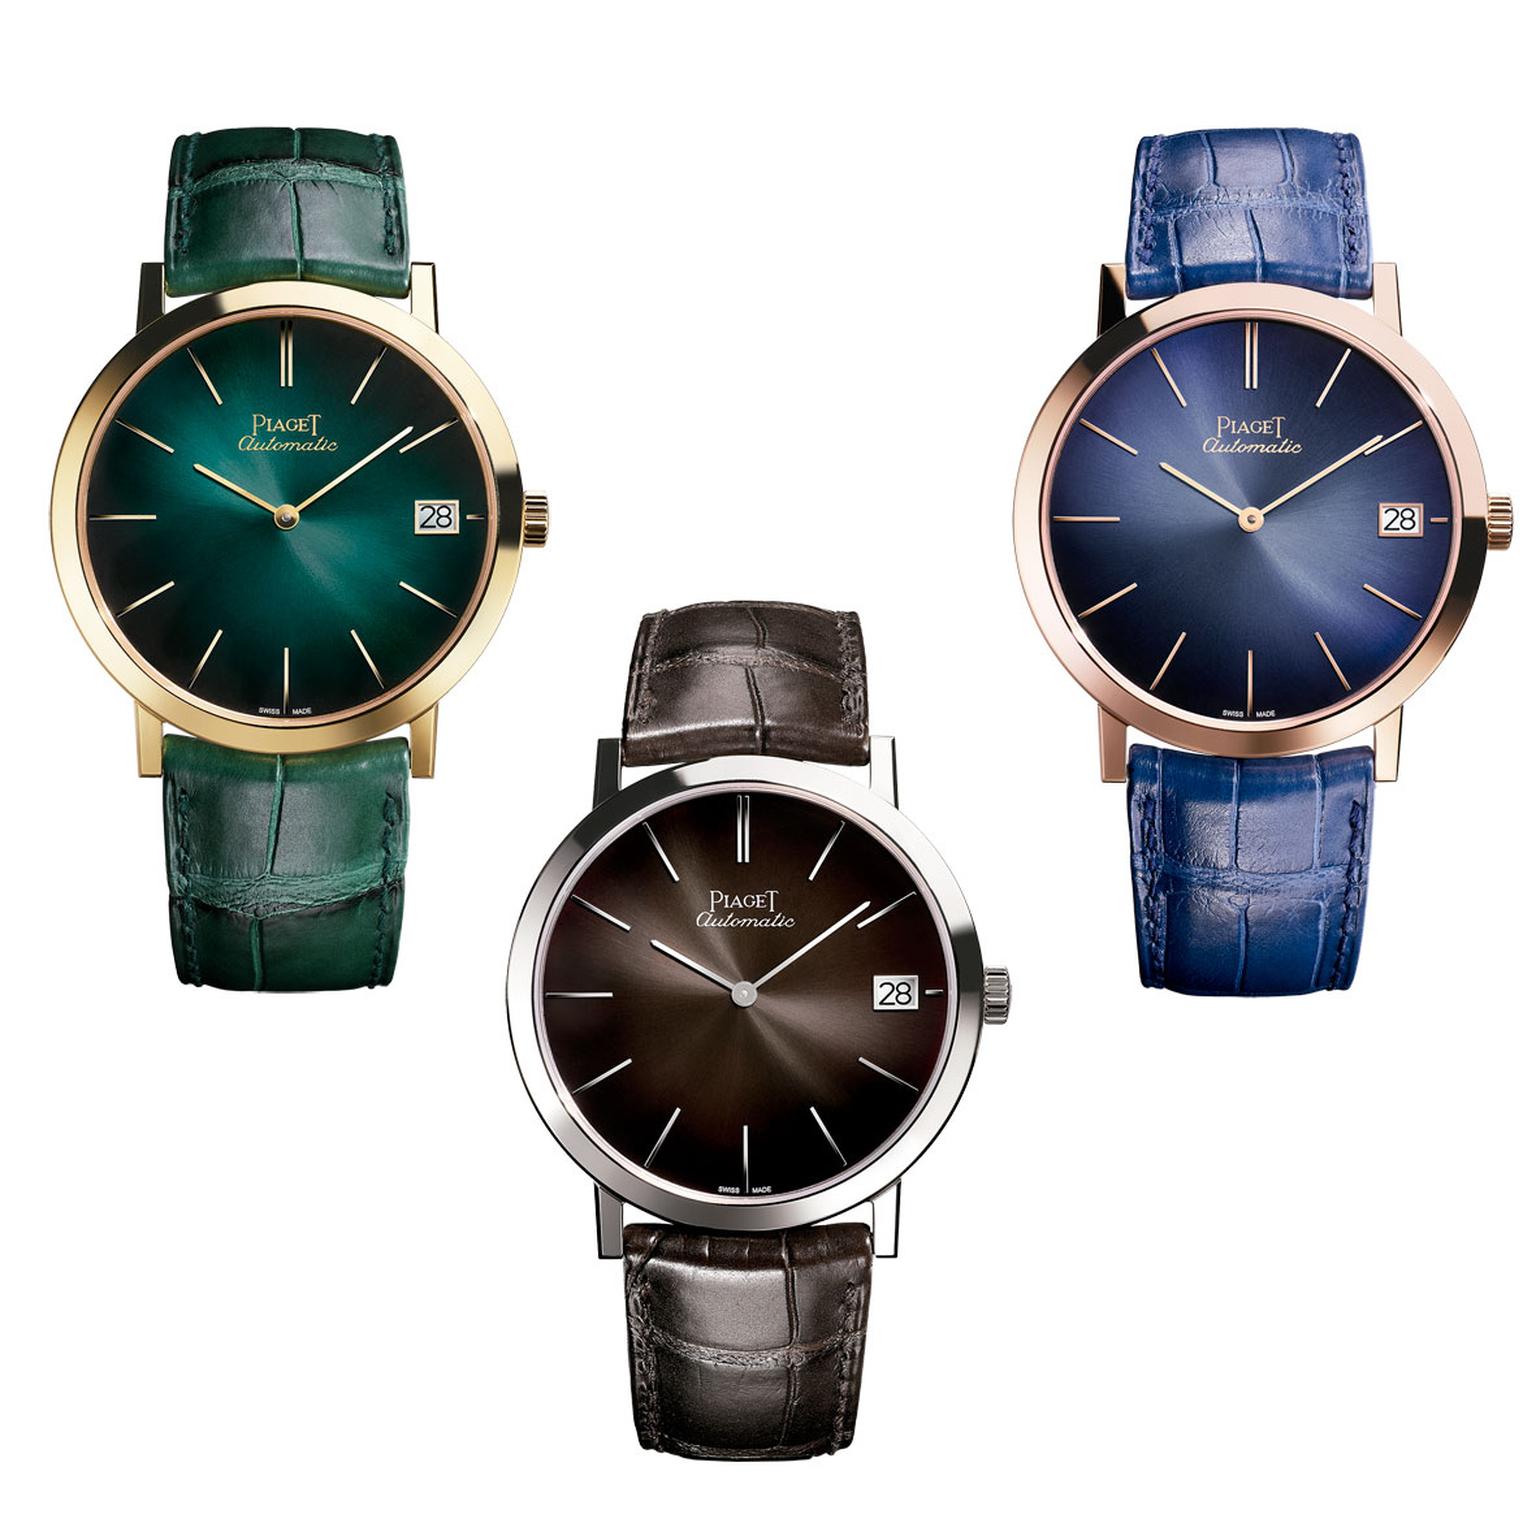 40mm Piaget Altiplano watches in green, grey and blue